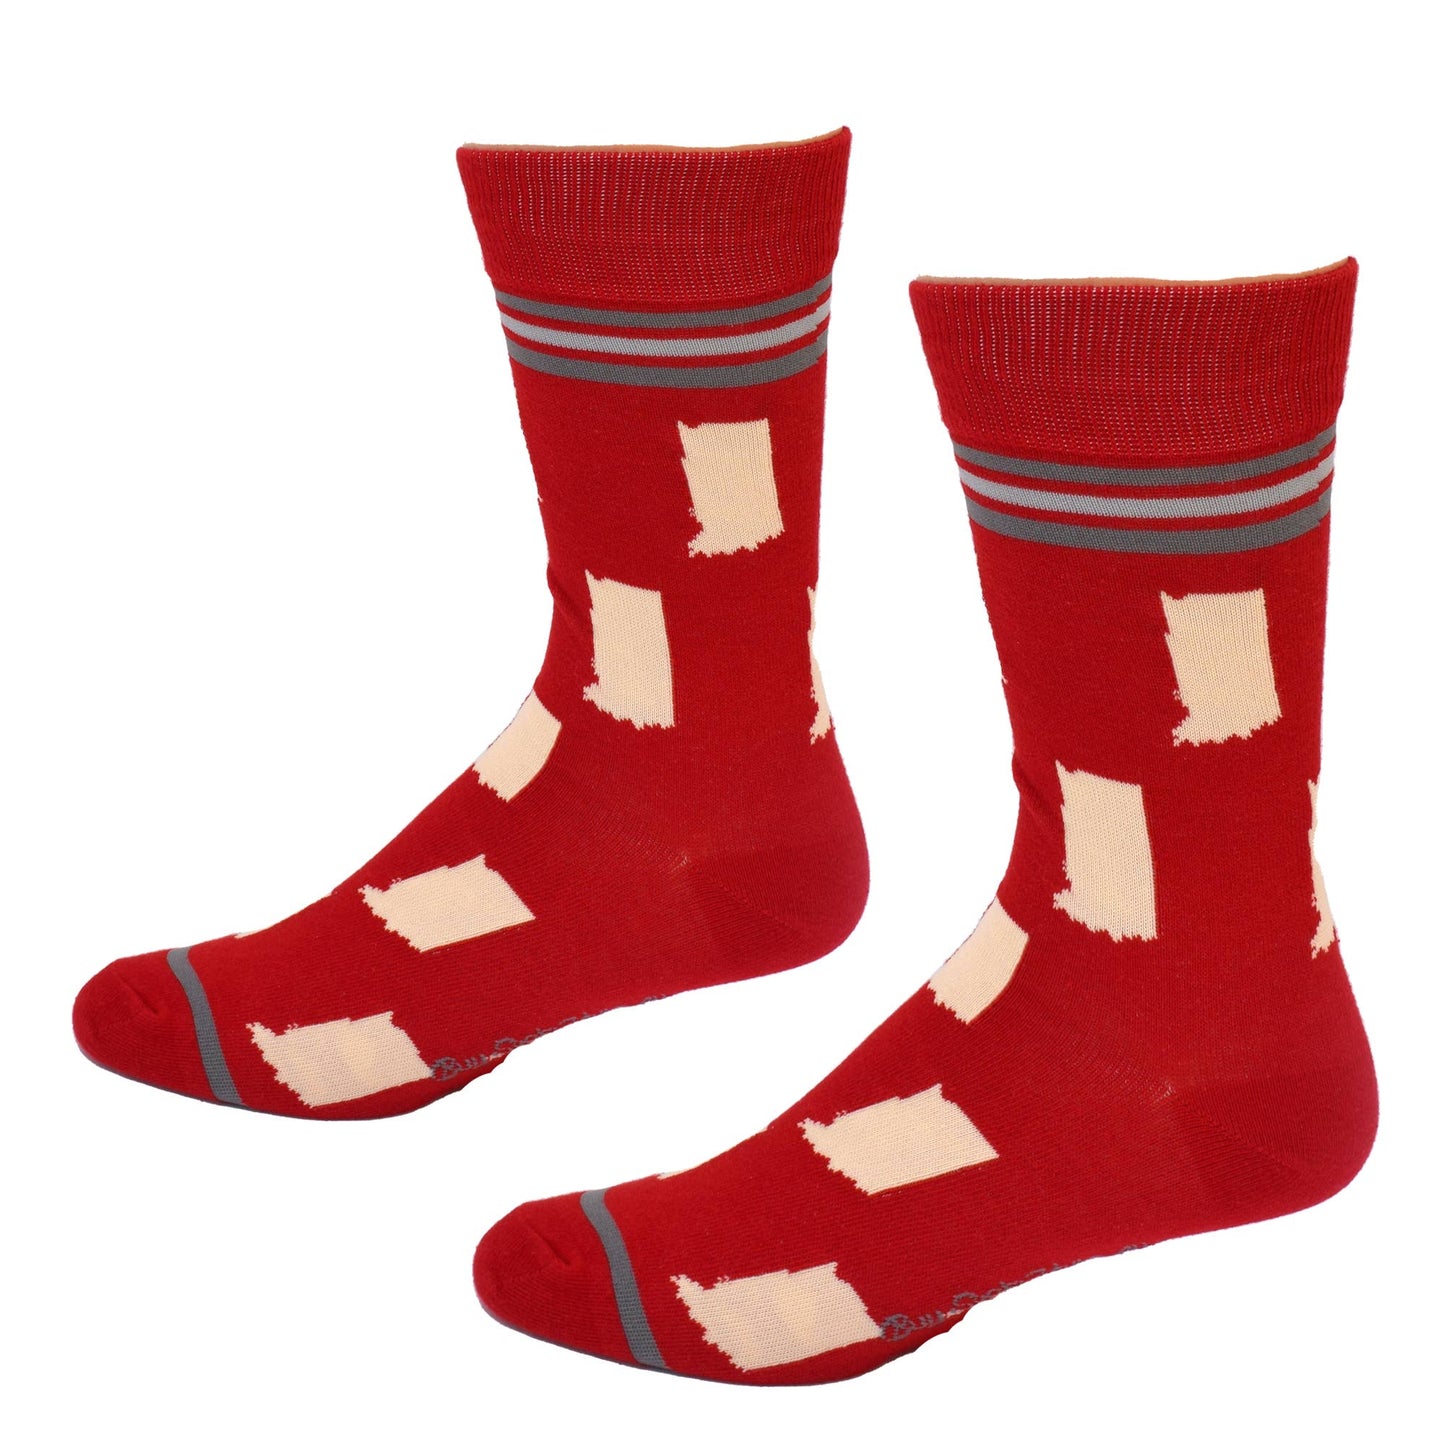 Buy Socks You All - Indiana State Shapes Crimson and Cream Men's Socks